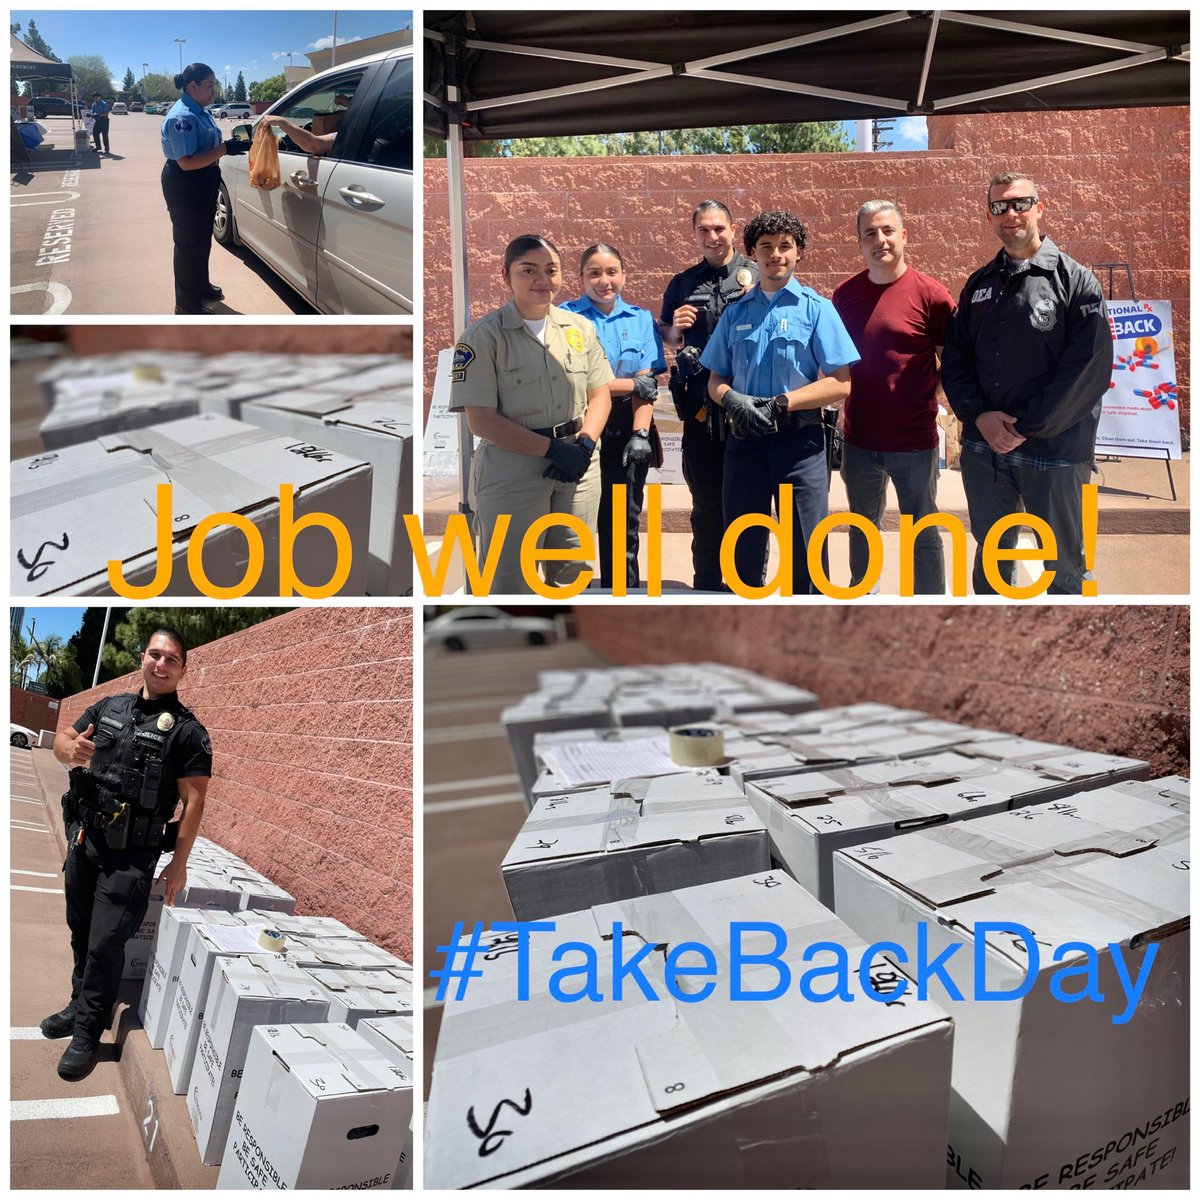 Thank you @BurbankPD for co-hosting #TakeBackDay with us. Job well done by all community members who participated! Today, Burbank PD collected over 30 boxes of unused or expired medications. @DEAHQ #drugfree #safedisposal #medications